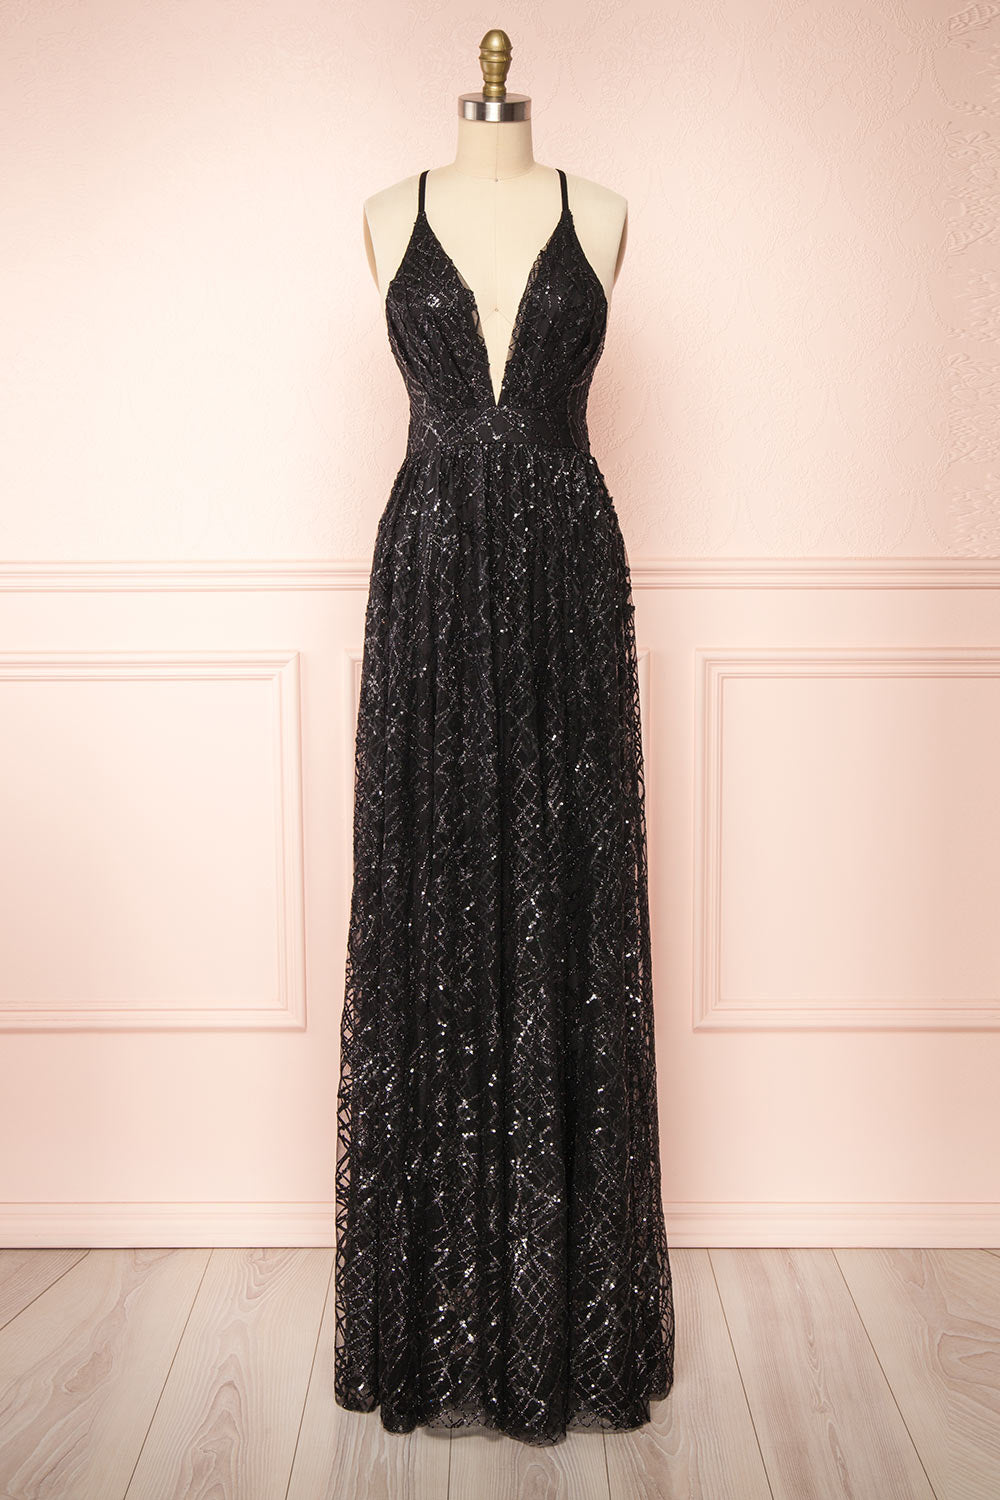 Tyffen Black Sequin Gown with Plunging Neckline | Boutique 1861 front view